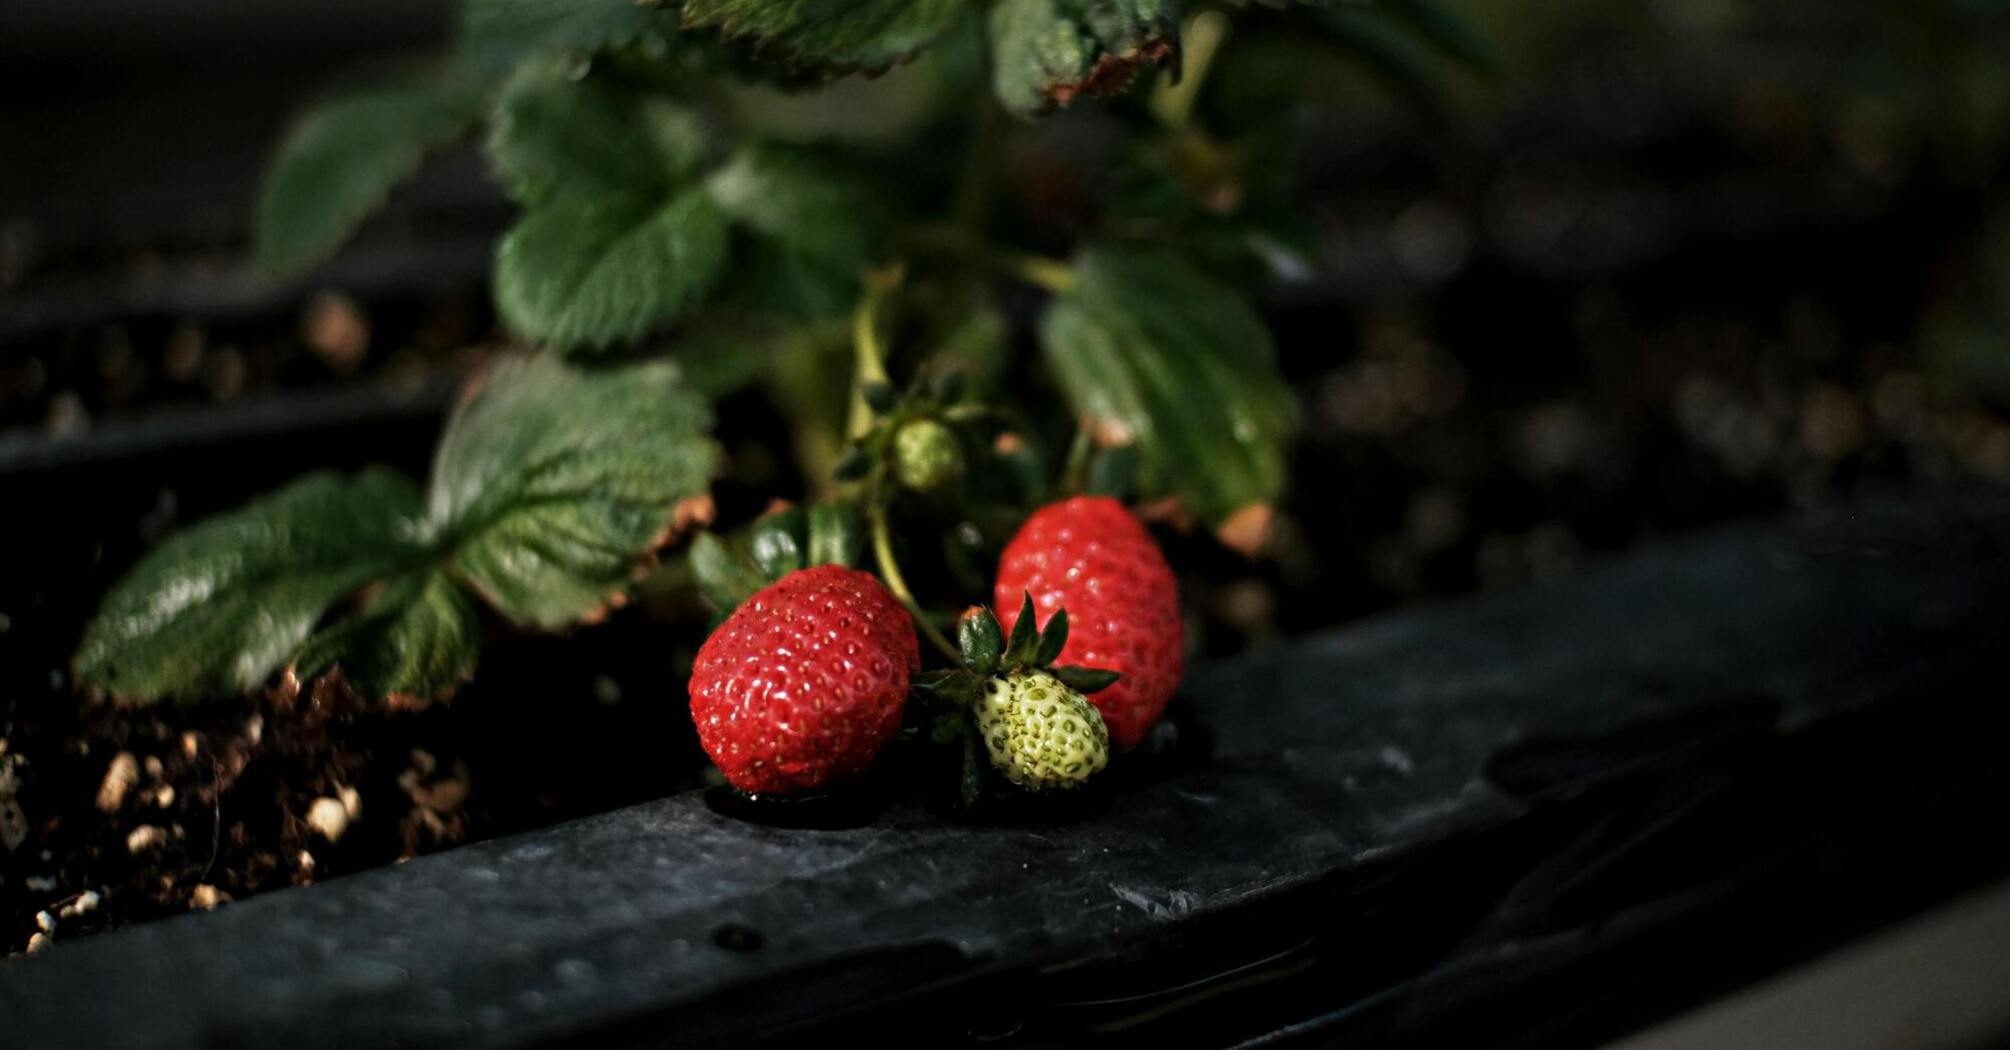 How to fertilize strawberries after winter